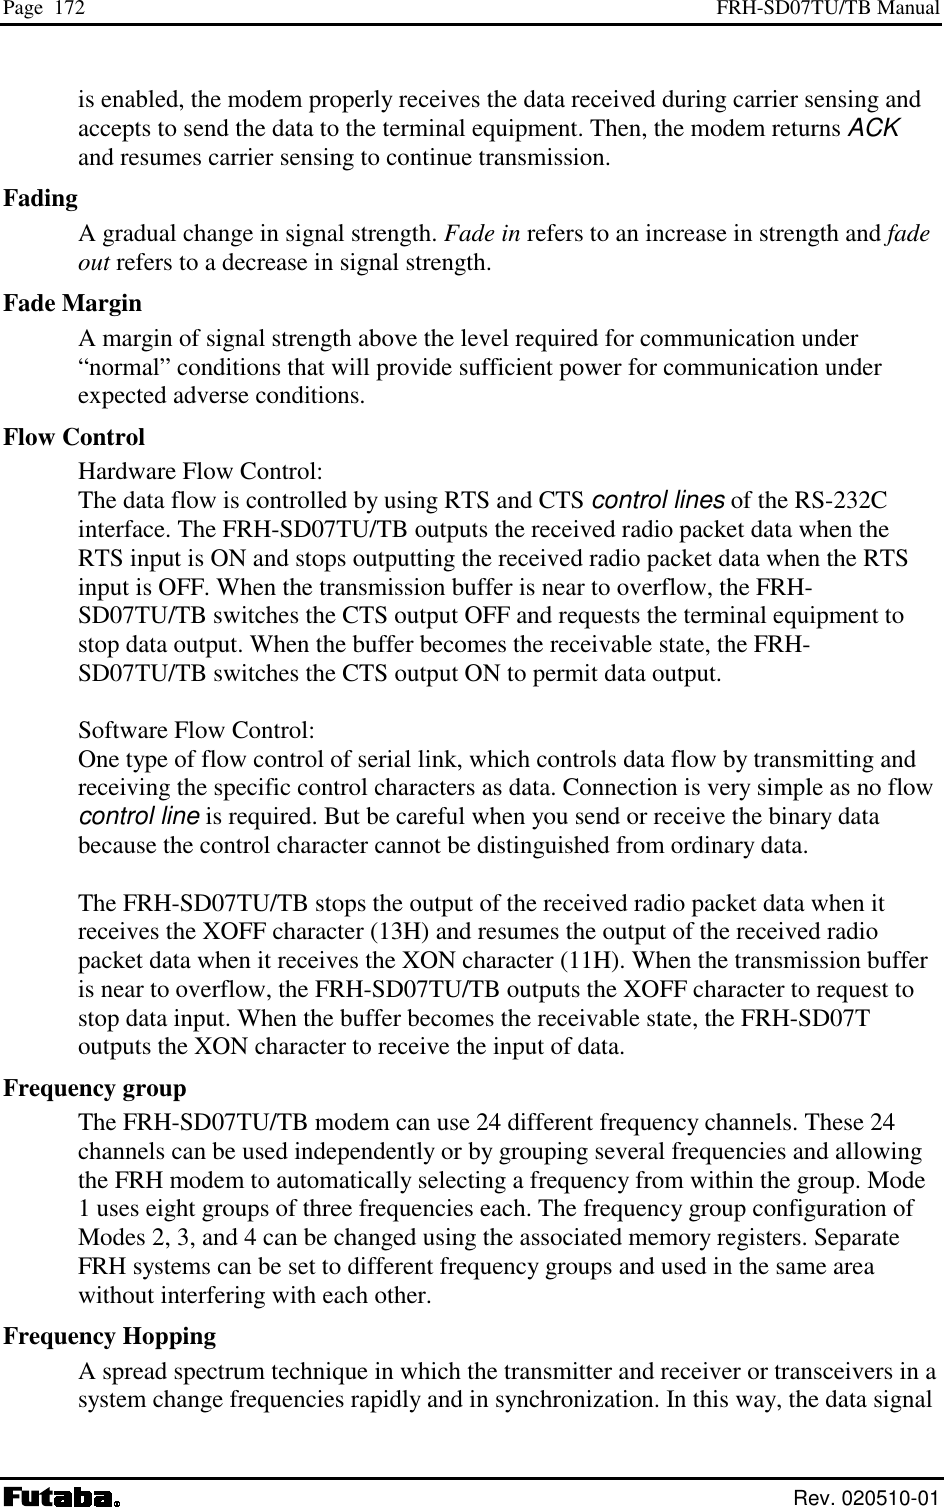 Page  172  FRH-SD07TU/TB Manual  Rev. 020510-01 is enabled, the modem properly receives the data received during carrier sensing and accepts to send the data to the terminal equipment. Then, the modem returns ACK and resumes carrier sensing to continue transmission. Fading A gradual change in signal strength. Fade in refers to an increase in strength and fade out refers to a decrease in signal strength. Fade Margin A margin of signal strength above the level required for communication under “normal” conditions that will provide sufficient power for communication under expected adverse conditions. Flow Control Hardware Flow Control:   The data flow is controlled by using RTS and CTS control lines of the RS-232C interface. The FRH-SD07TU/TB outputs the received radio packet data when the RTS input is ON and stops outputting the received radio packet data when the RTS input is OFF. When the transmission buffer is near to overflow, the FRH-SD07TU/TB switches the CTS output OFF and requests the terminal equipment to stop data output. When the buffer becomes the receivable state, the FRH-SD07TU/TB switches the CTS output ON to permit data output.  Software Flow Control:   One type of flow control of serial link, which controls data flow by transmitting and receiving the specific control characters as data. Connection is very simple as no flow control line is required. But be careful when you send or receive the binary data because the control character cannot be distinguished from ordinary data.   The FRH-SD07TU/TB stops the output of the received radio packet data when it receives the XOFF character (13H) and resumes the output of the received radio packet data when it receives the XON character (11H). When the transmission buffer is near to overflow, the FRH-SD07TU/TB outputs the XOFF character to request to stop data input. When the buffer becomes the receivable state, the FRH-SD07T outputs the XON character to receive the input of data. Frequency group The FRH-SD07TU/TB modem can use 24 different frequency channels. These 24 channels can be used independently or by grouping several frequencies and allowing the FRH modem to automatically selecting a frequency from within the group. Mode 1 uses eight groups of three frequencies each. The frequency group configuration of Modes 2, 3, and 4 can be changed using the associated memory registers. Separate FRH systems can be set to different frequency groups and used in the same area without interfering with each other. Frequency Hopping A spread spectrum technique in which the transmitter and receiver or transceivers in a system change frequencies rapidly and in synchronization. In this way, the data signal 